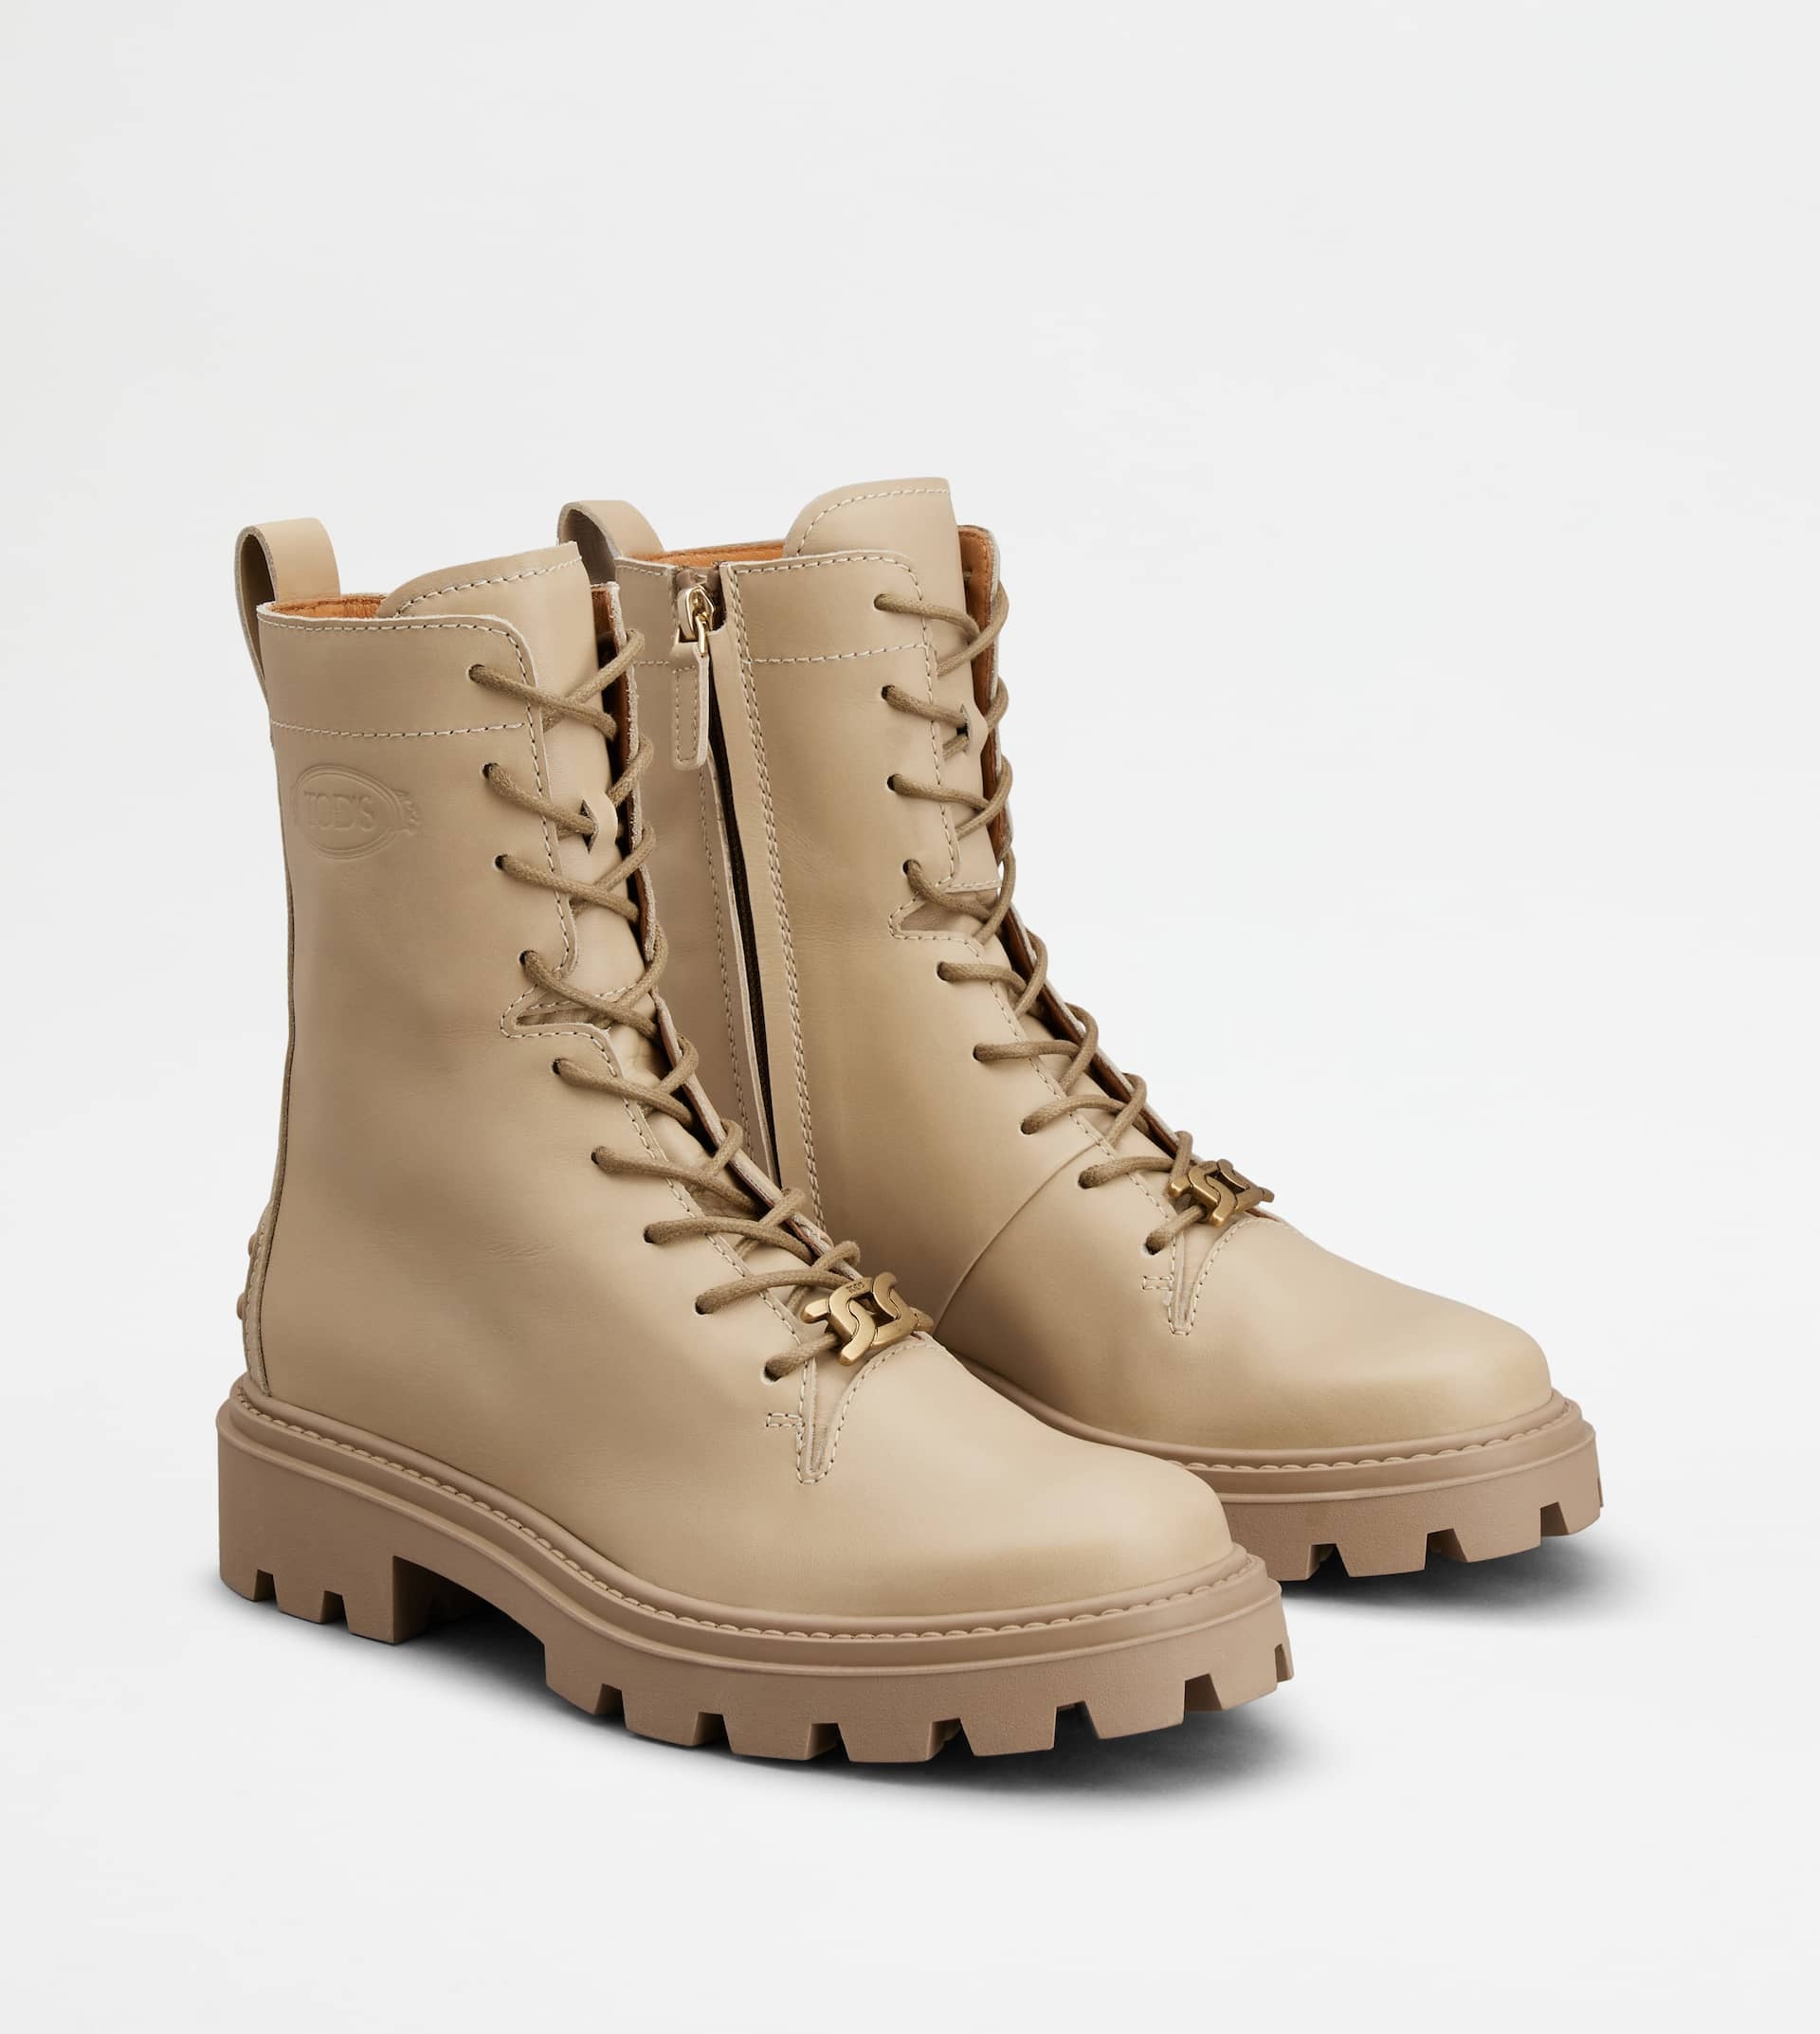 COMBAT BOOTS IN LEATHER - BEIGE - 3